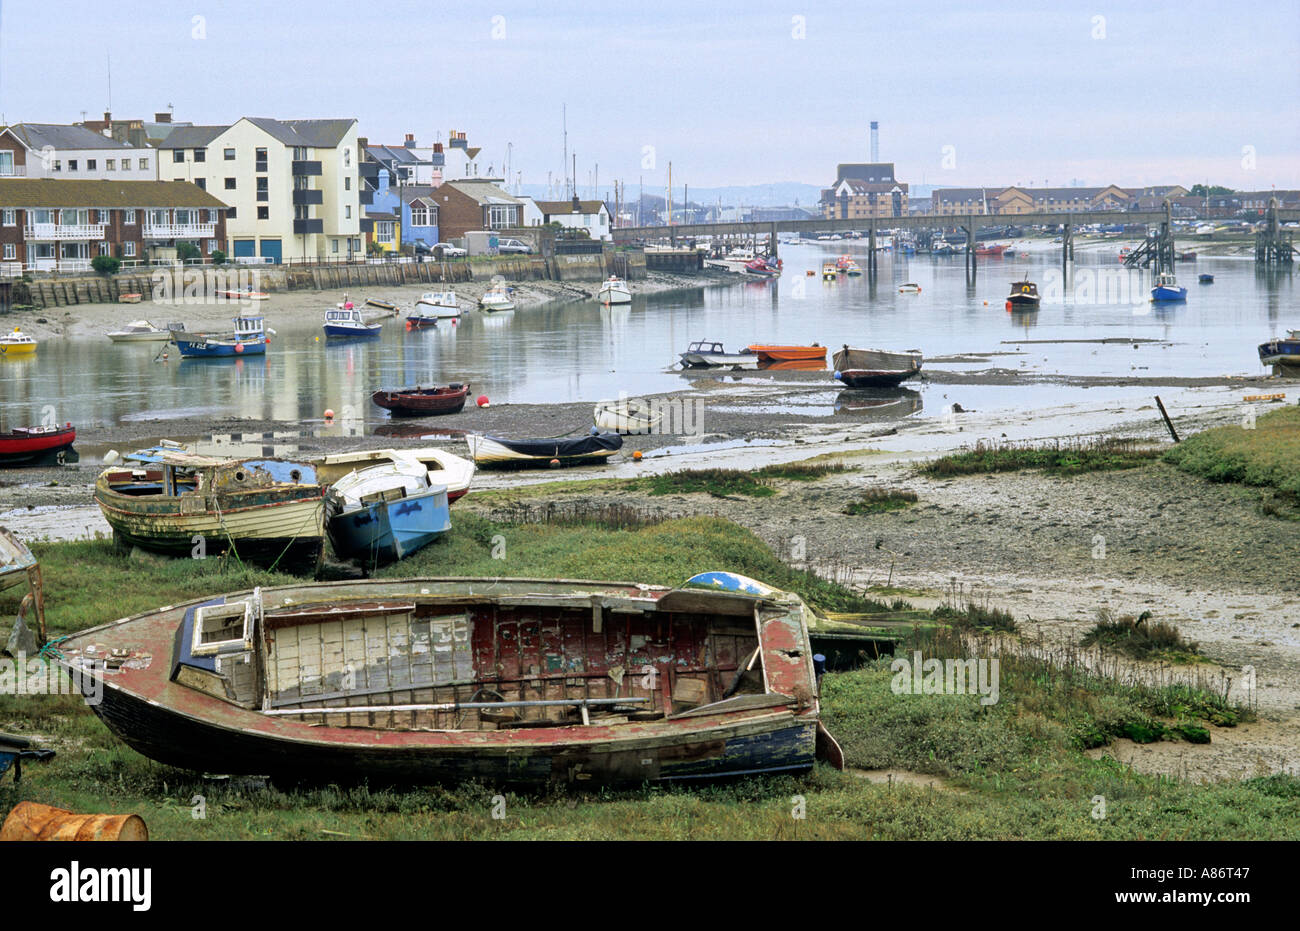 Boats on the river Adur at Shoreham shoreham by sea West Sussex Stock Photo